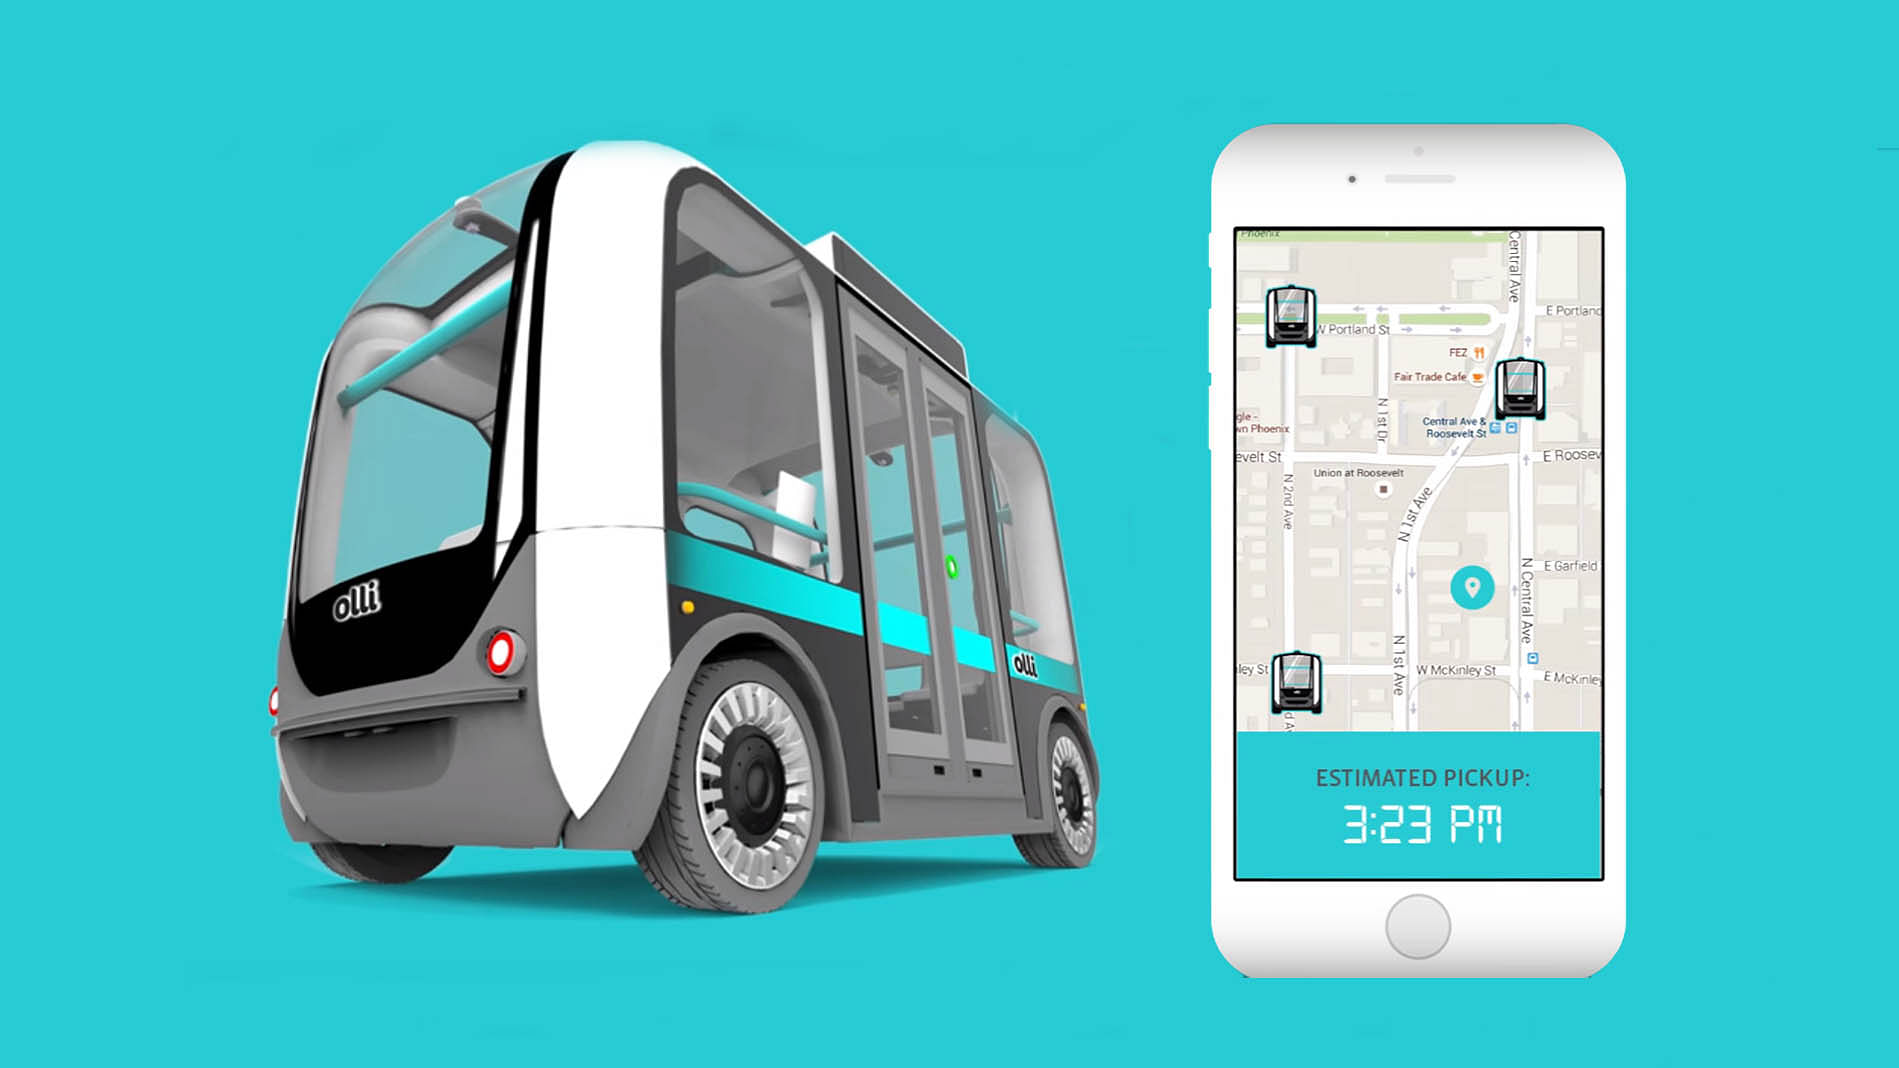 Introducing ‘Olli,’ the IoT Electric Bus Powered by IBM Watson